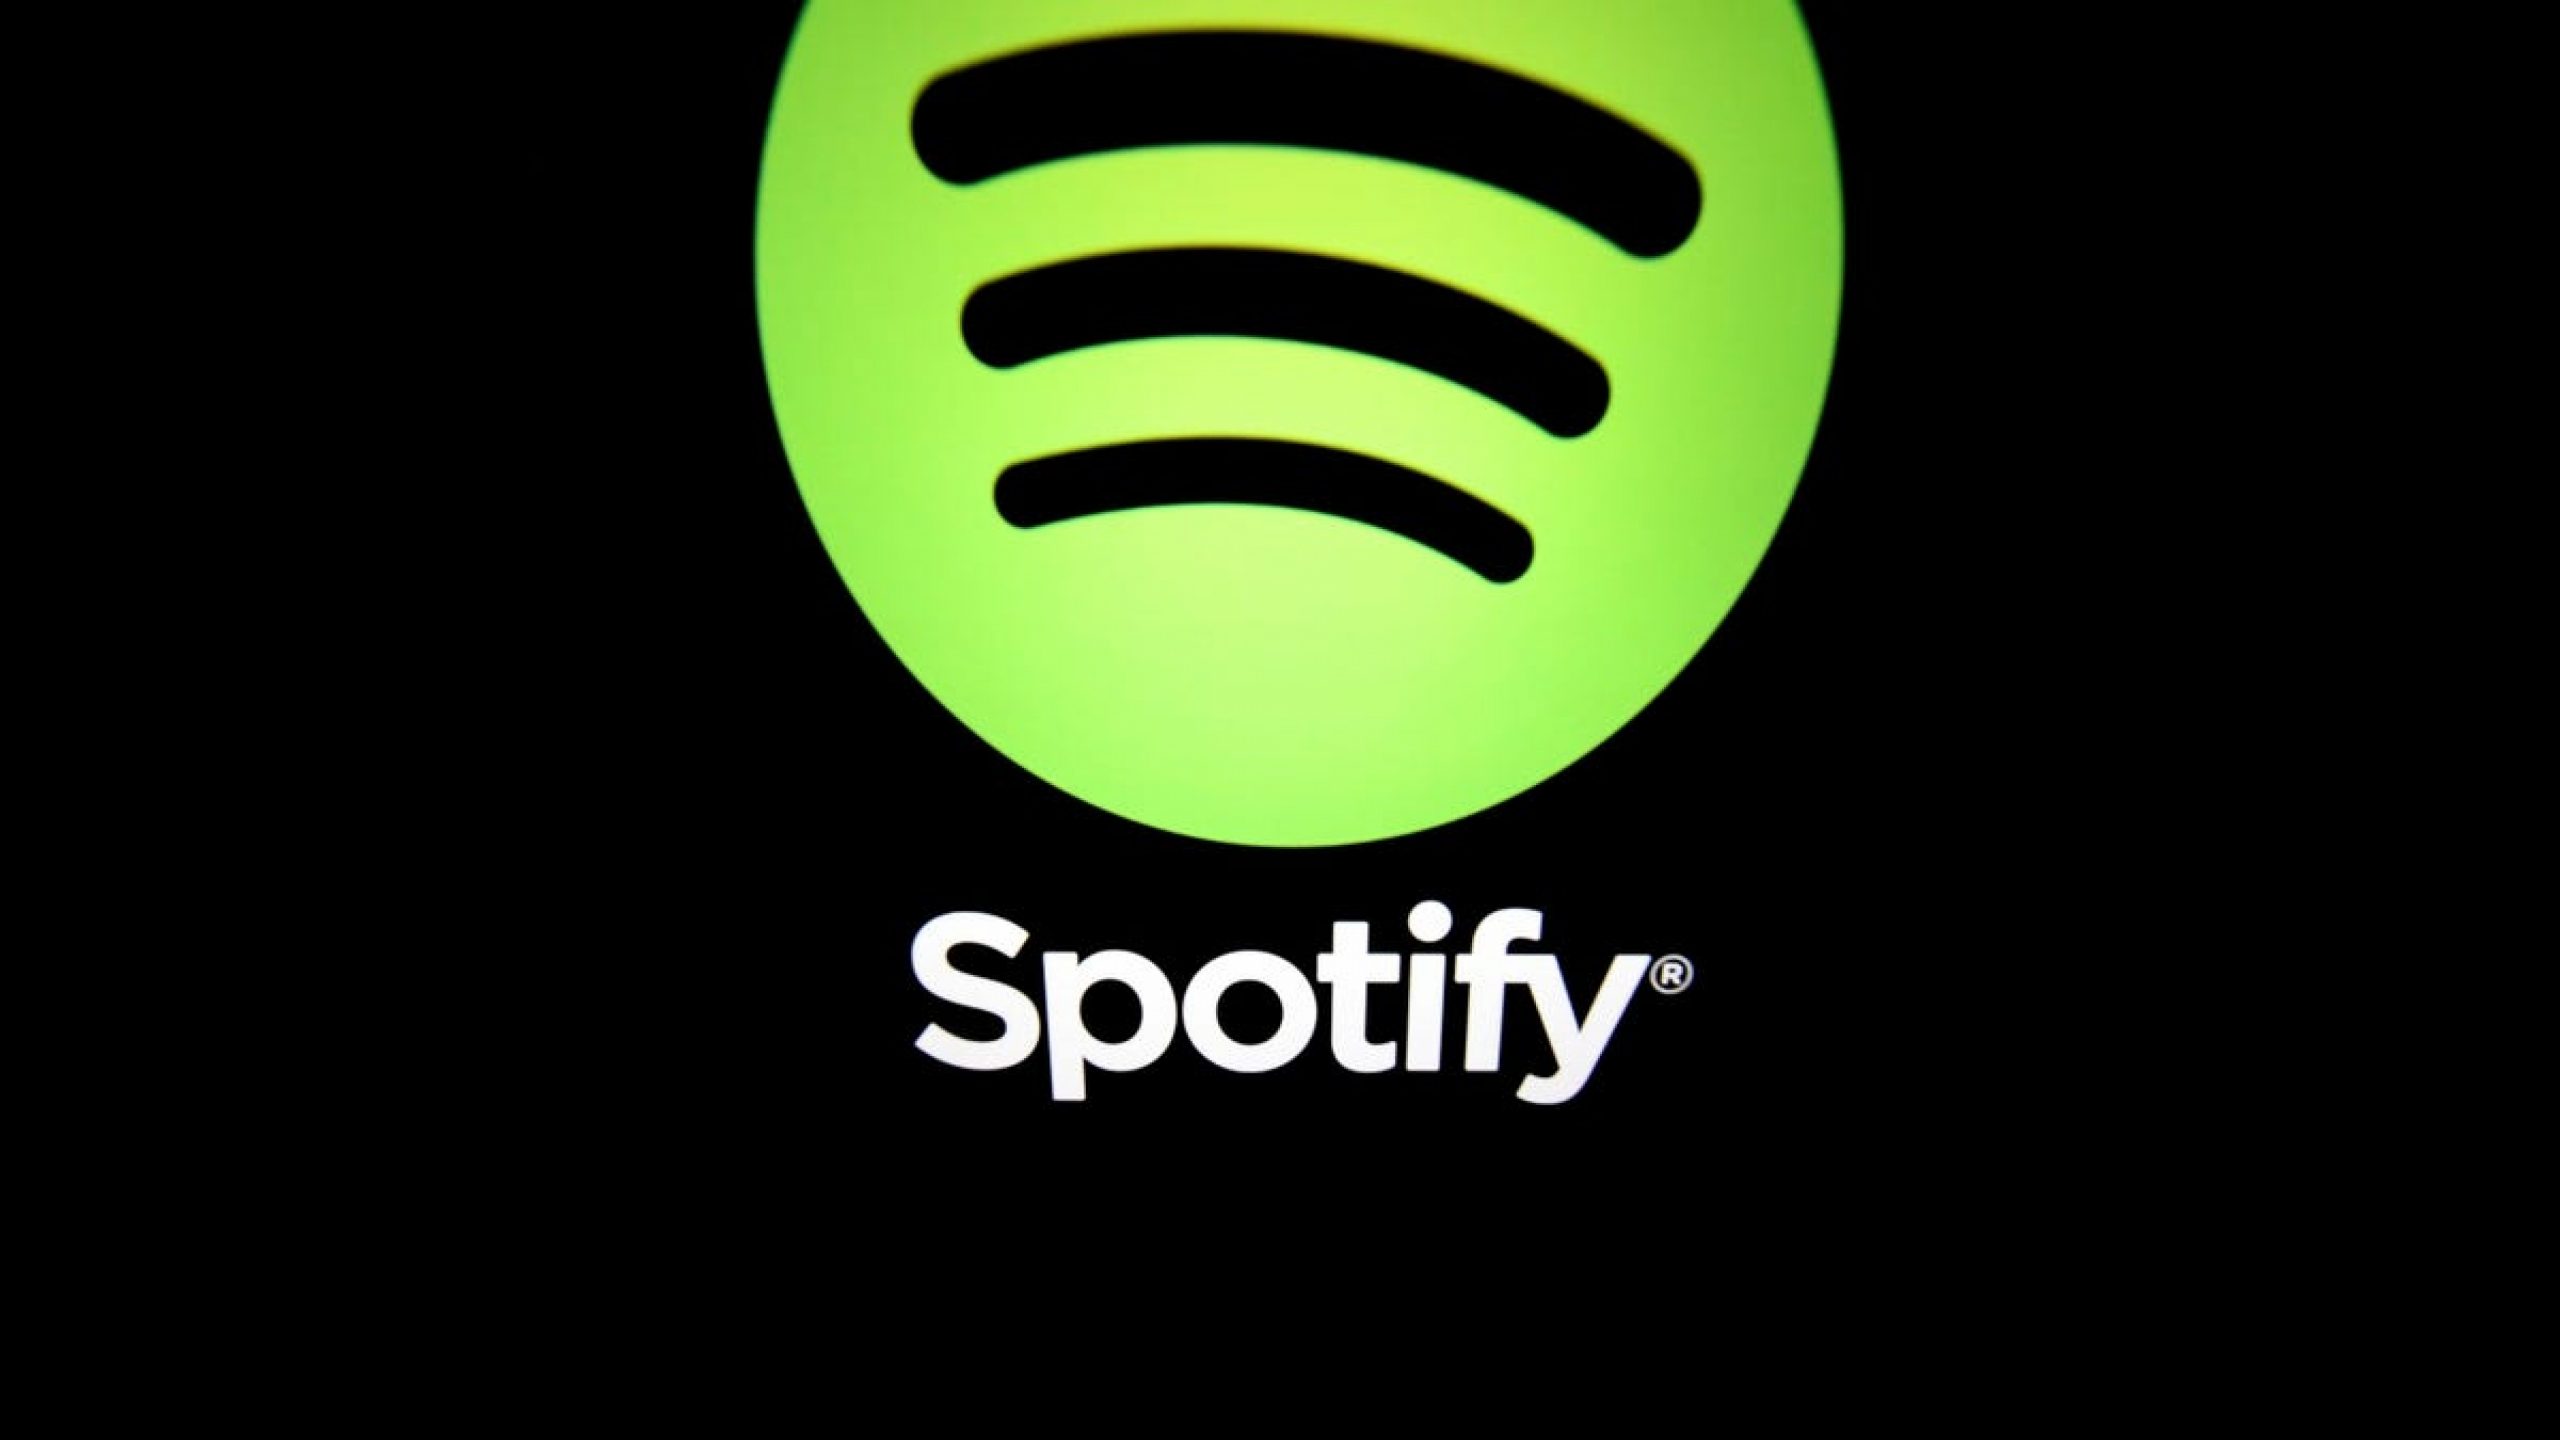 Spotify Buys Podz to Make It Easier to Find Podcasts You Actually Like